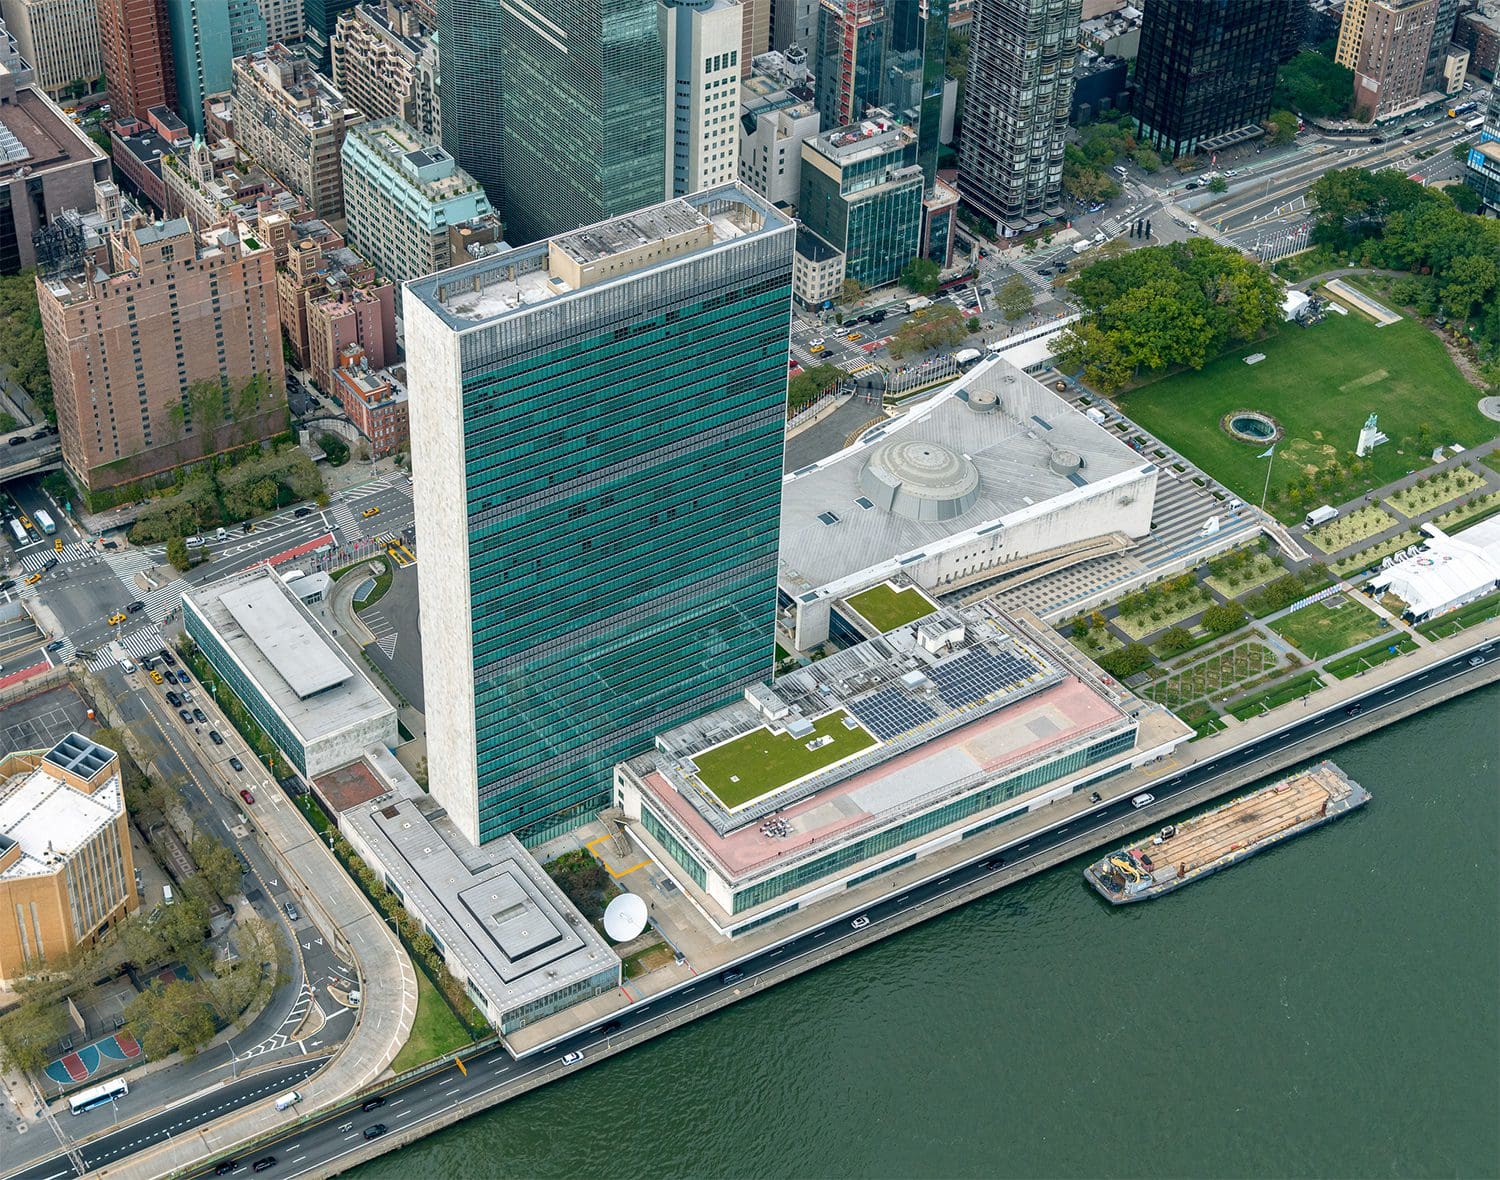 UN Green Roof United Nations